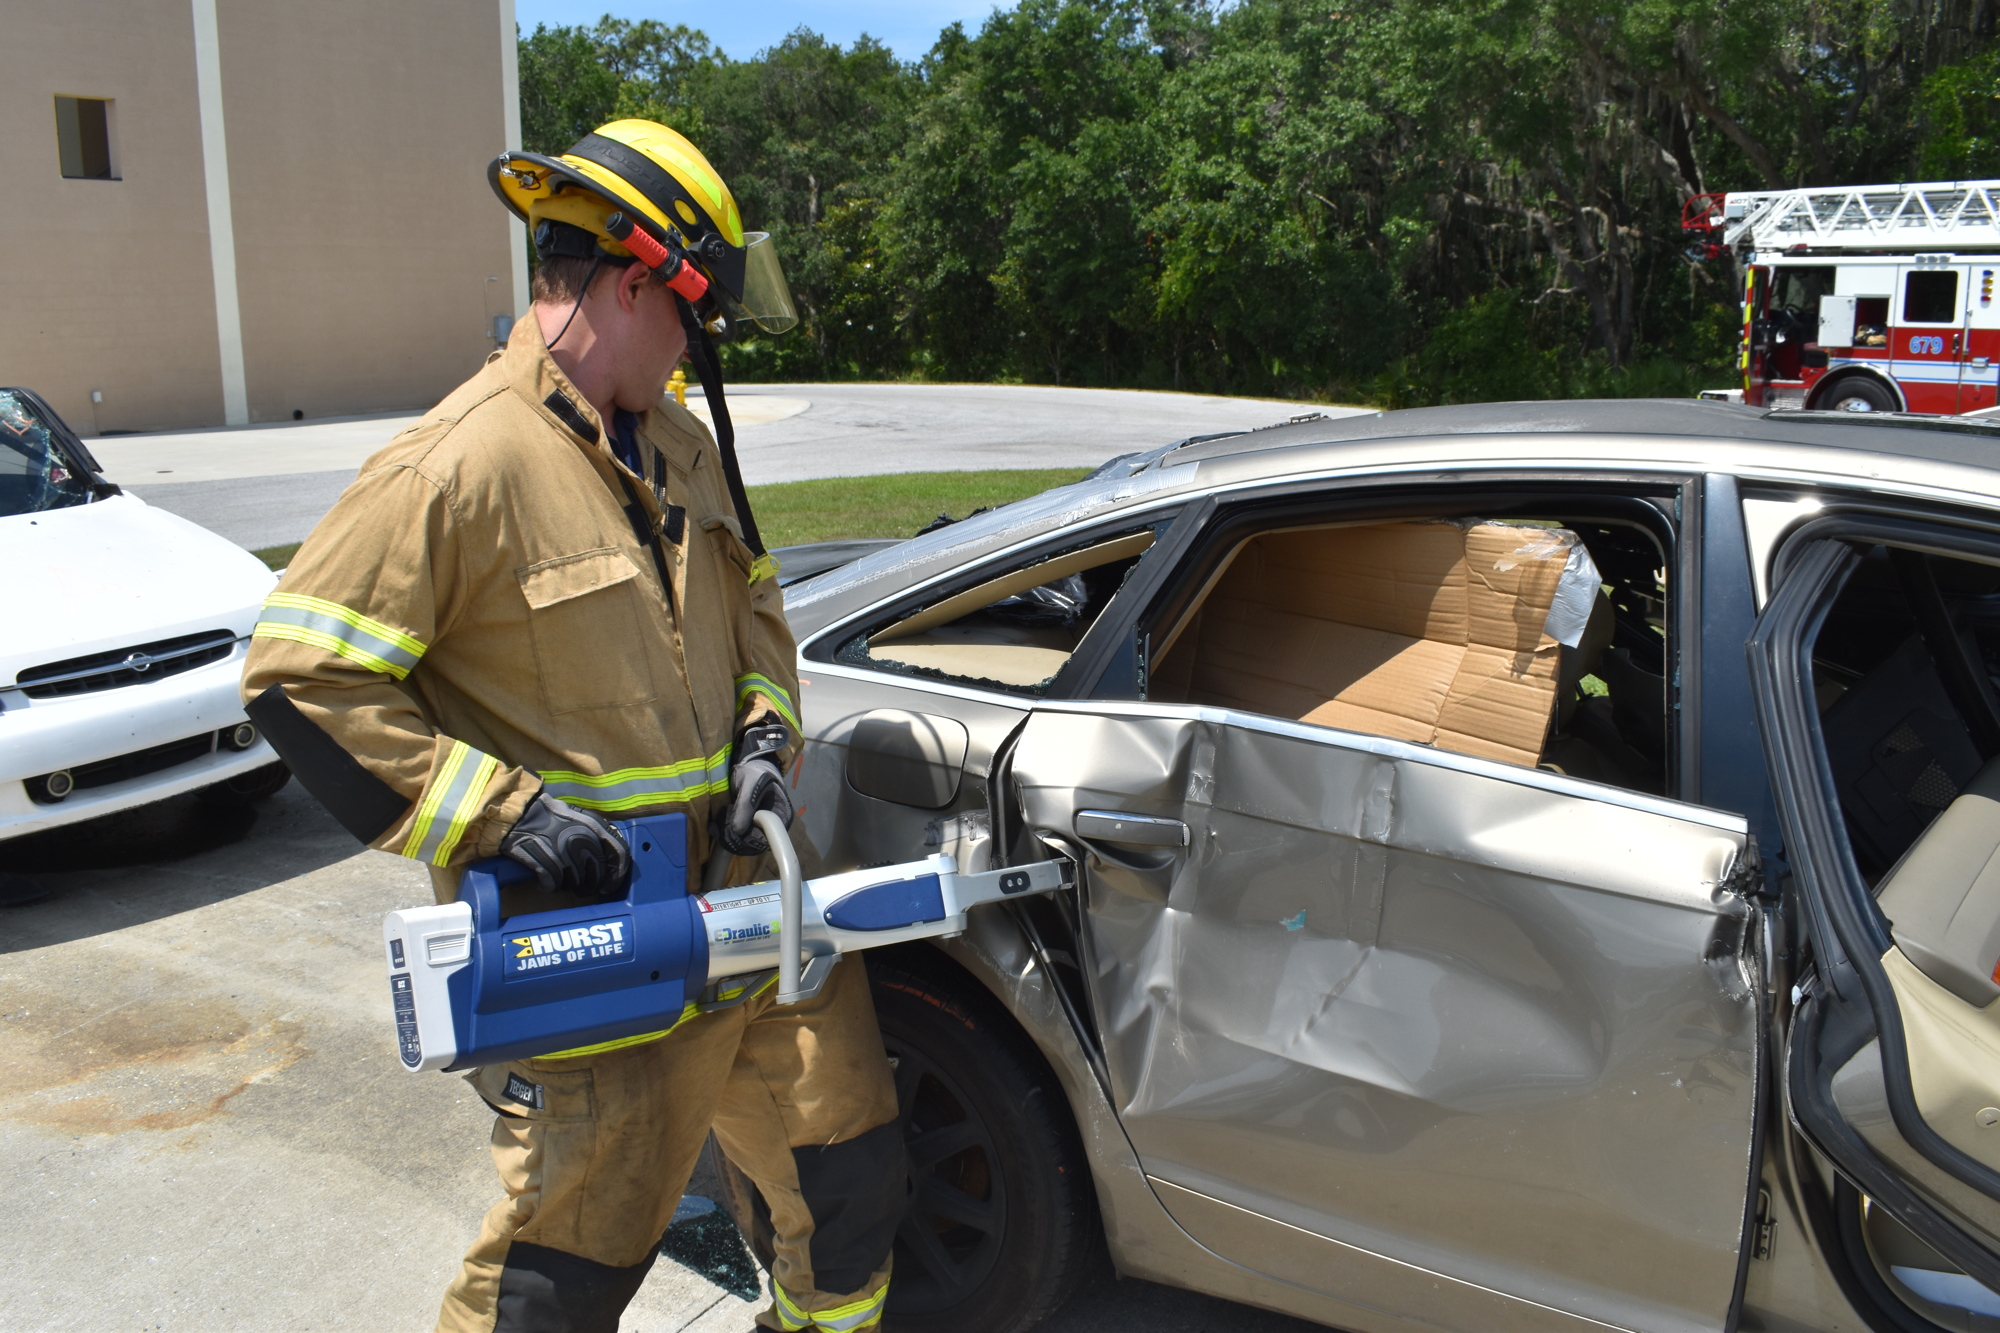 Firefighter Bret Kanapaux uses a spreader to pry open a car door during extrication training at East Manatee Fire Rescue Station 1. Training helped everything go just right during Karen Guest's rescue.